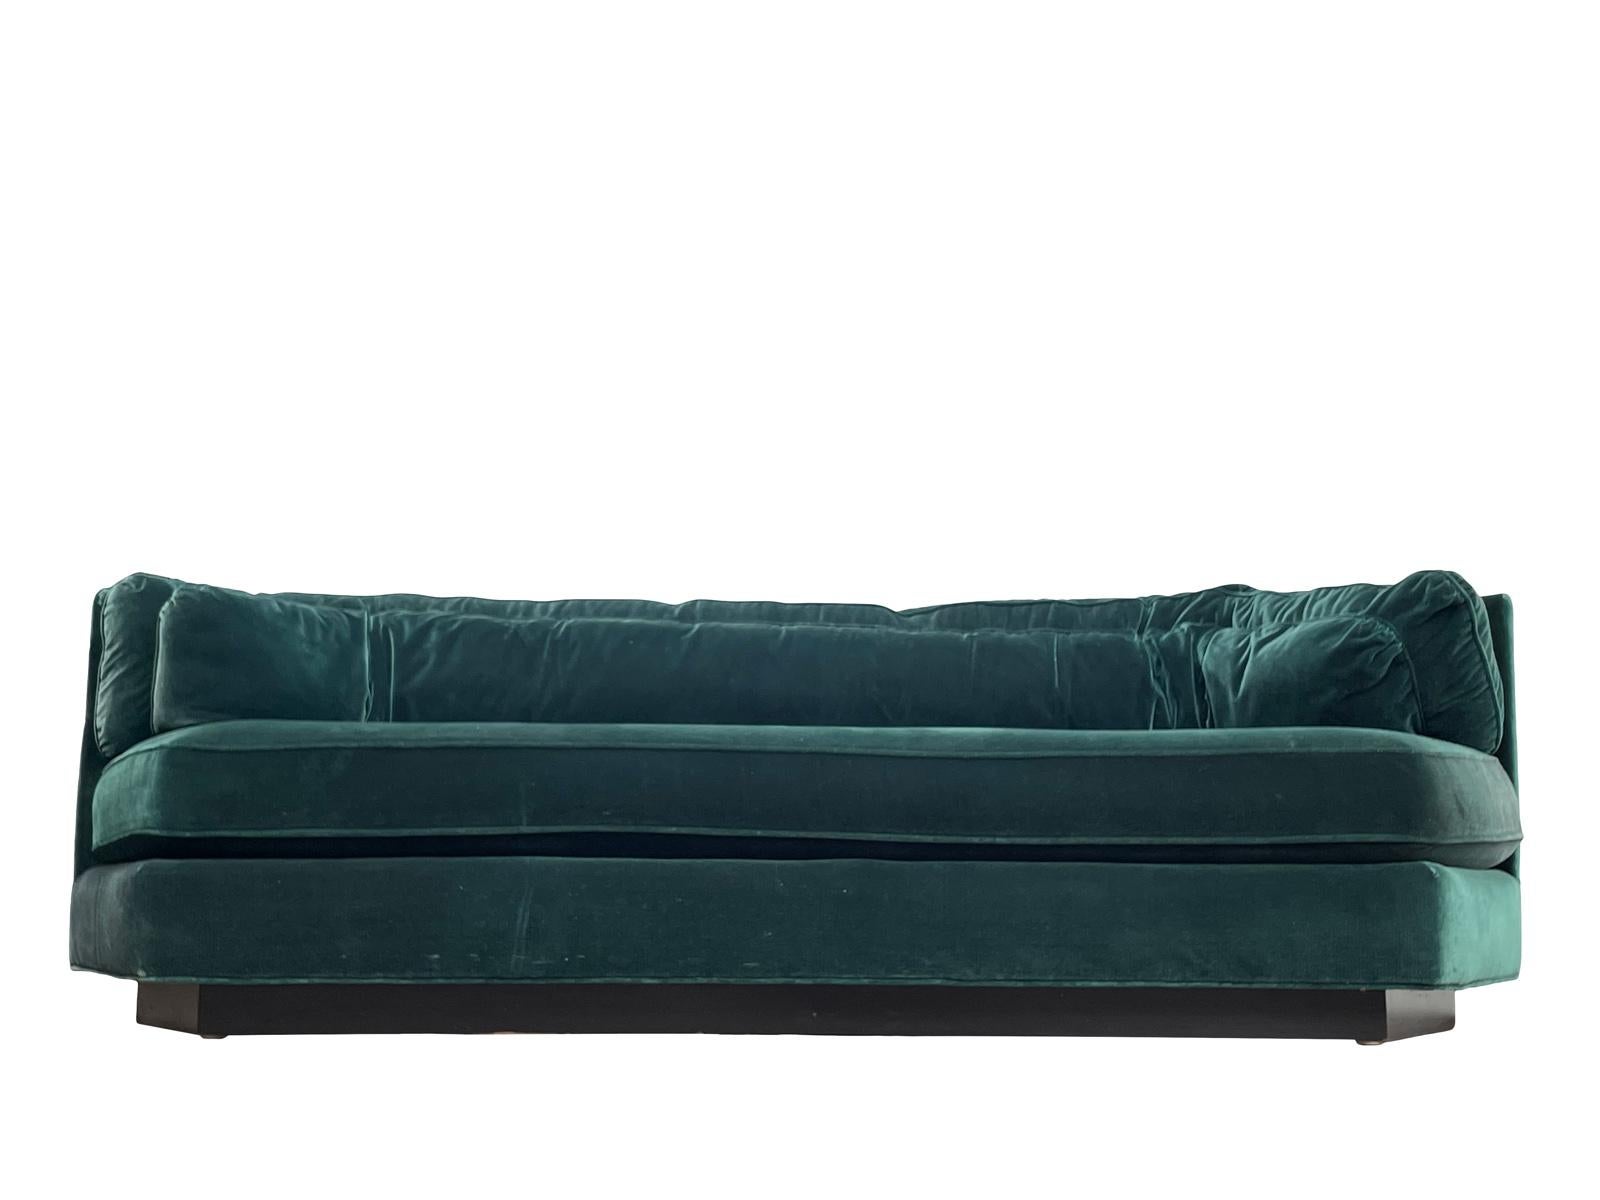 Luxurious hexagonal green velvet sofa in the manner of Milo Baughman by Bernhardt “Flair” with black plinth base. Also available are 2 matching club chairs and an exact sofa in different upholstery 